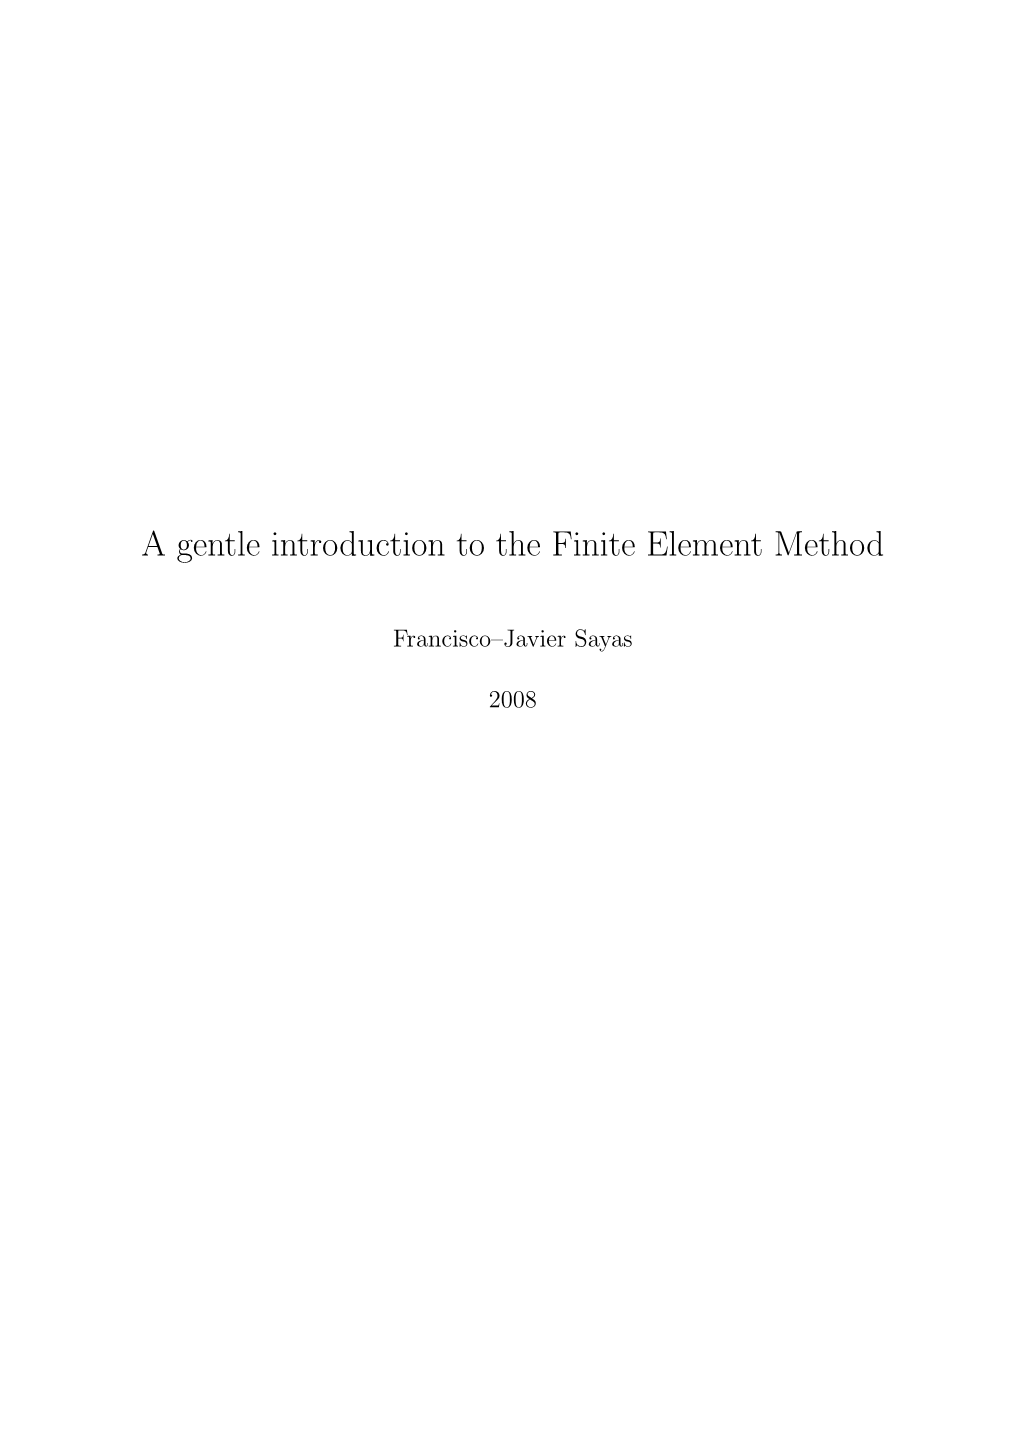 A Gentle Introduction to the Finite Element Method